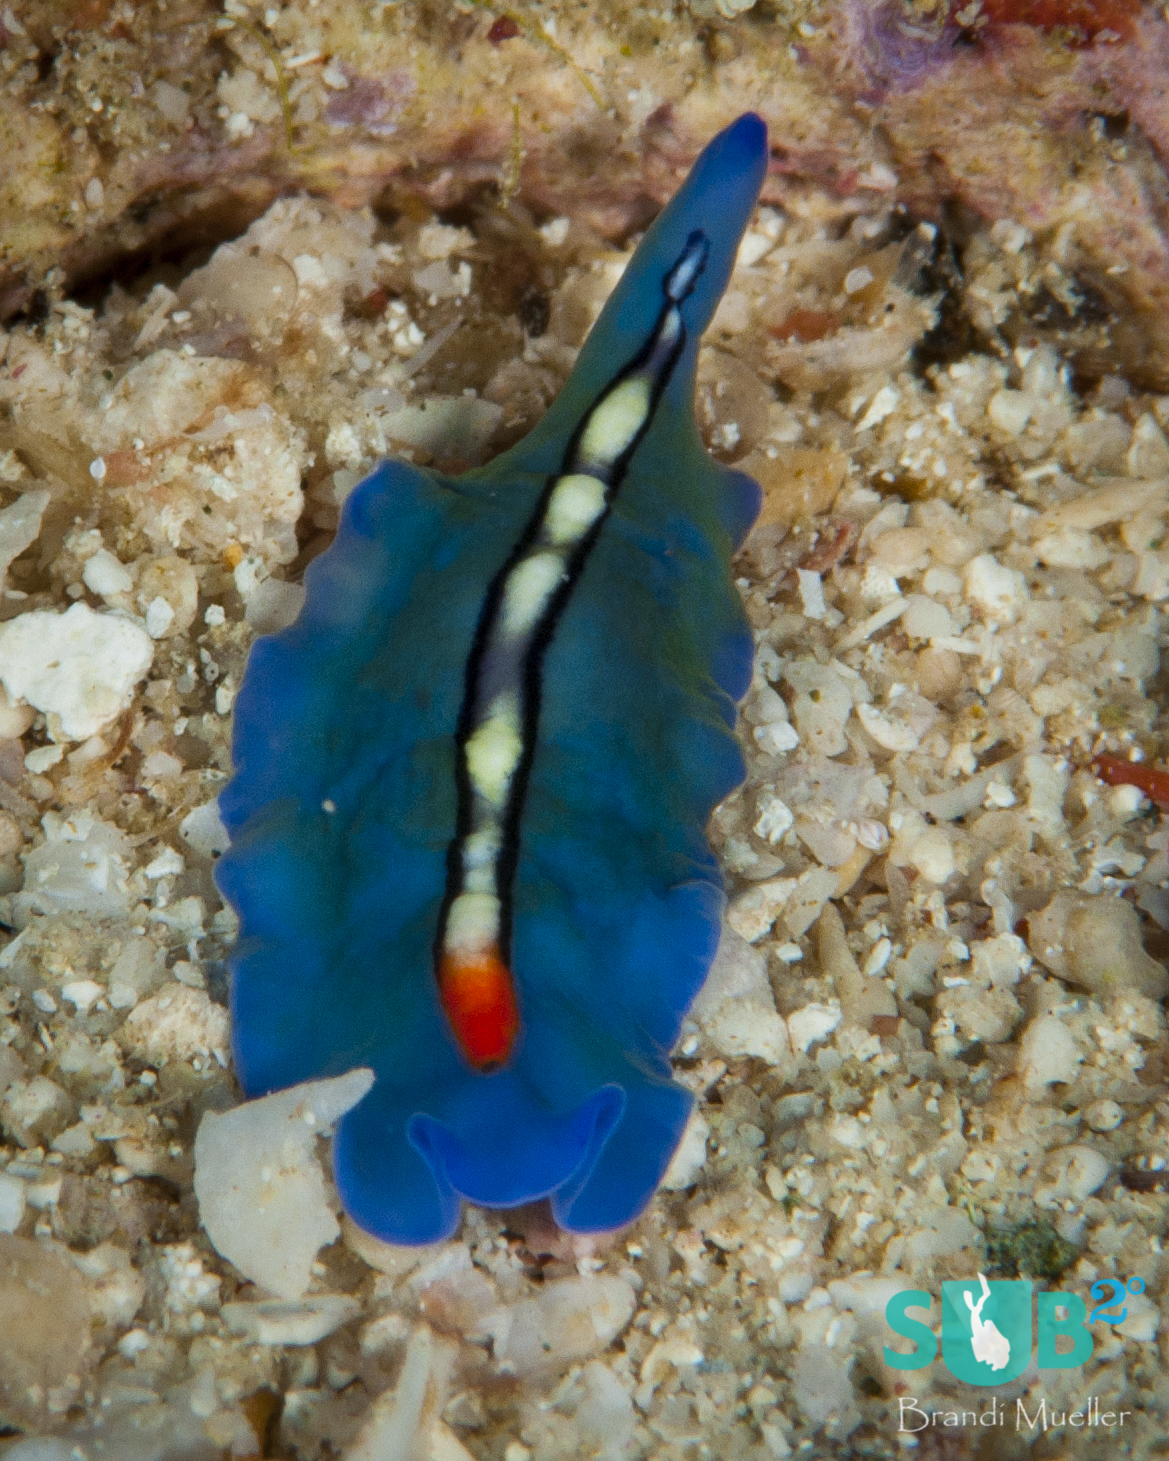 Pseudoceros bifurcus is commonly refered to as the "Racing-stripe flatworm".